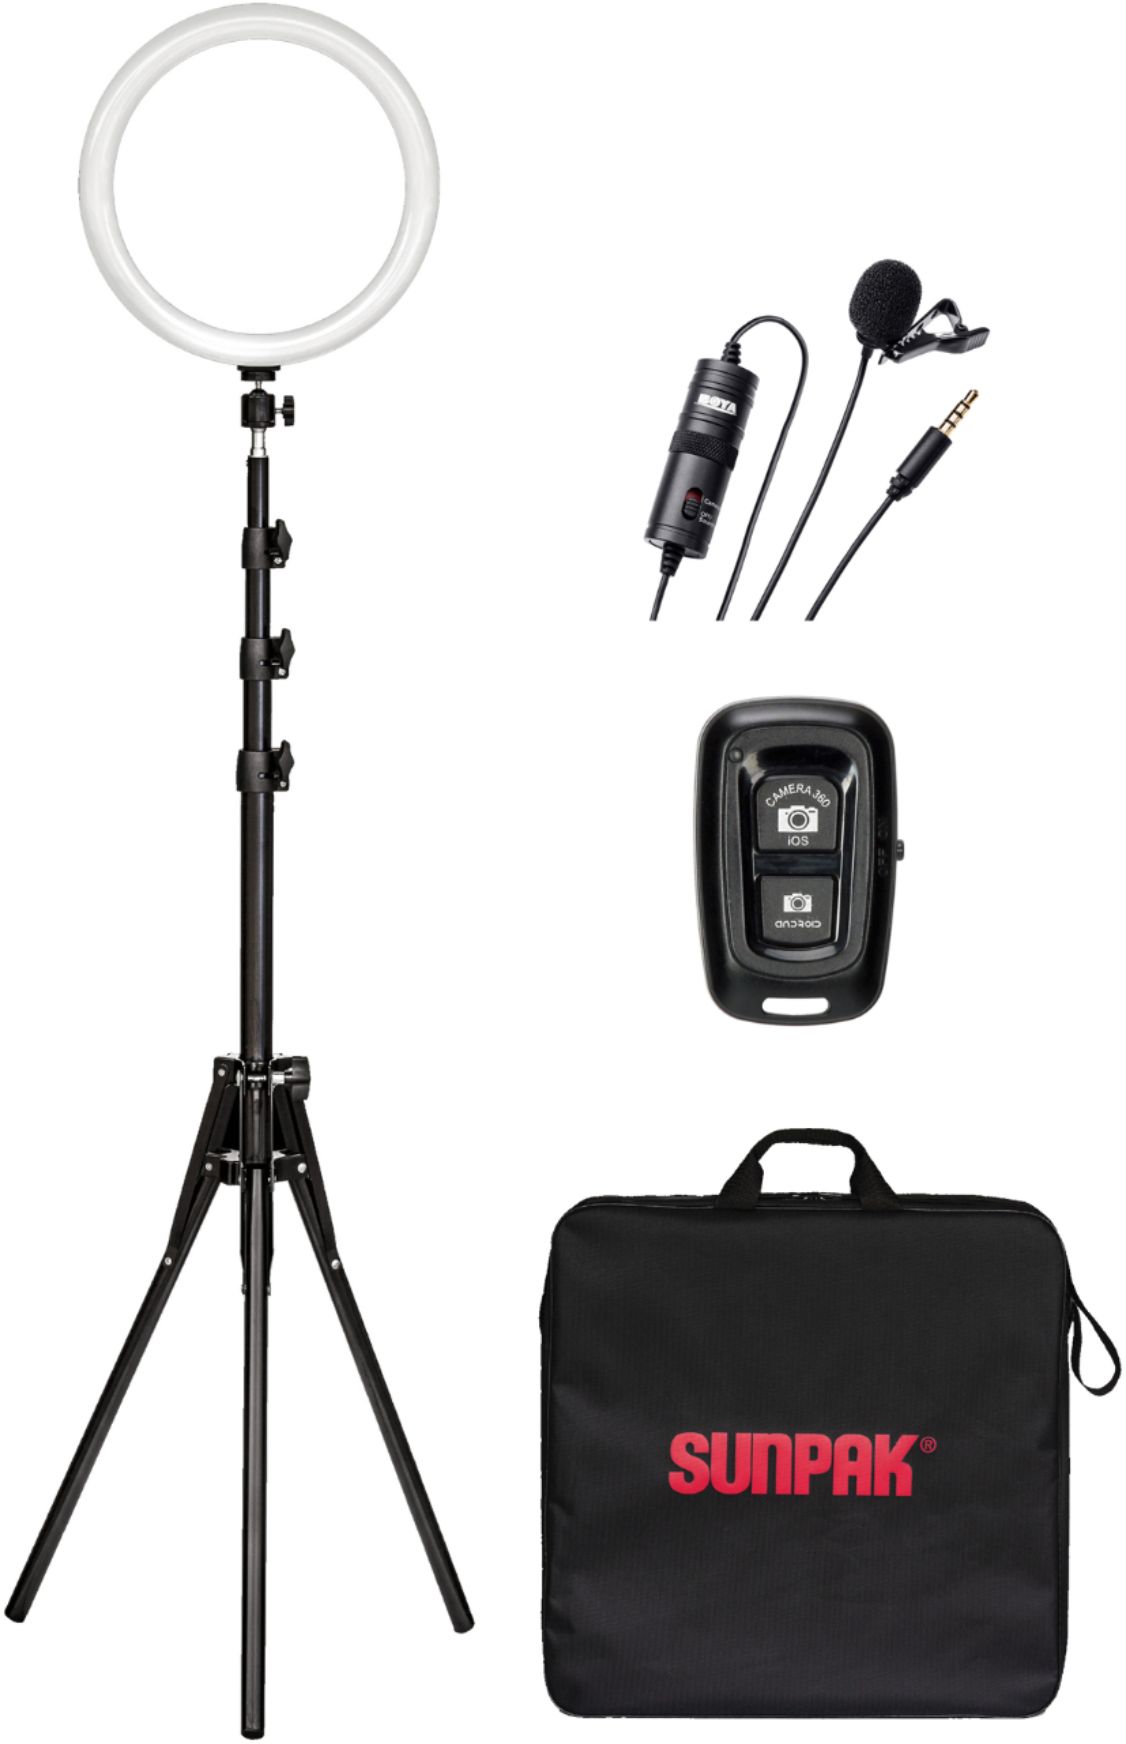 Angle View: Sunpak - 12" Bi-Color Ring Light Kit with BOYA Lavalier Microphone and Bluetooth Remote for Smartphones and Compact Cameras